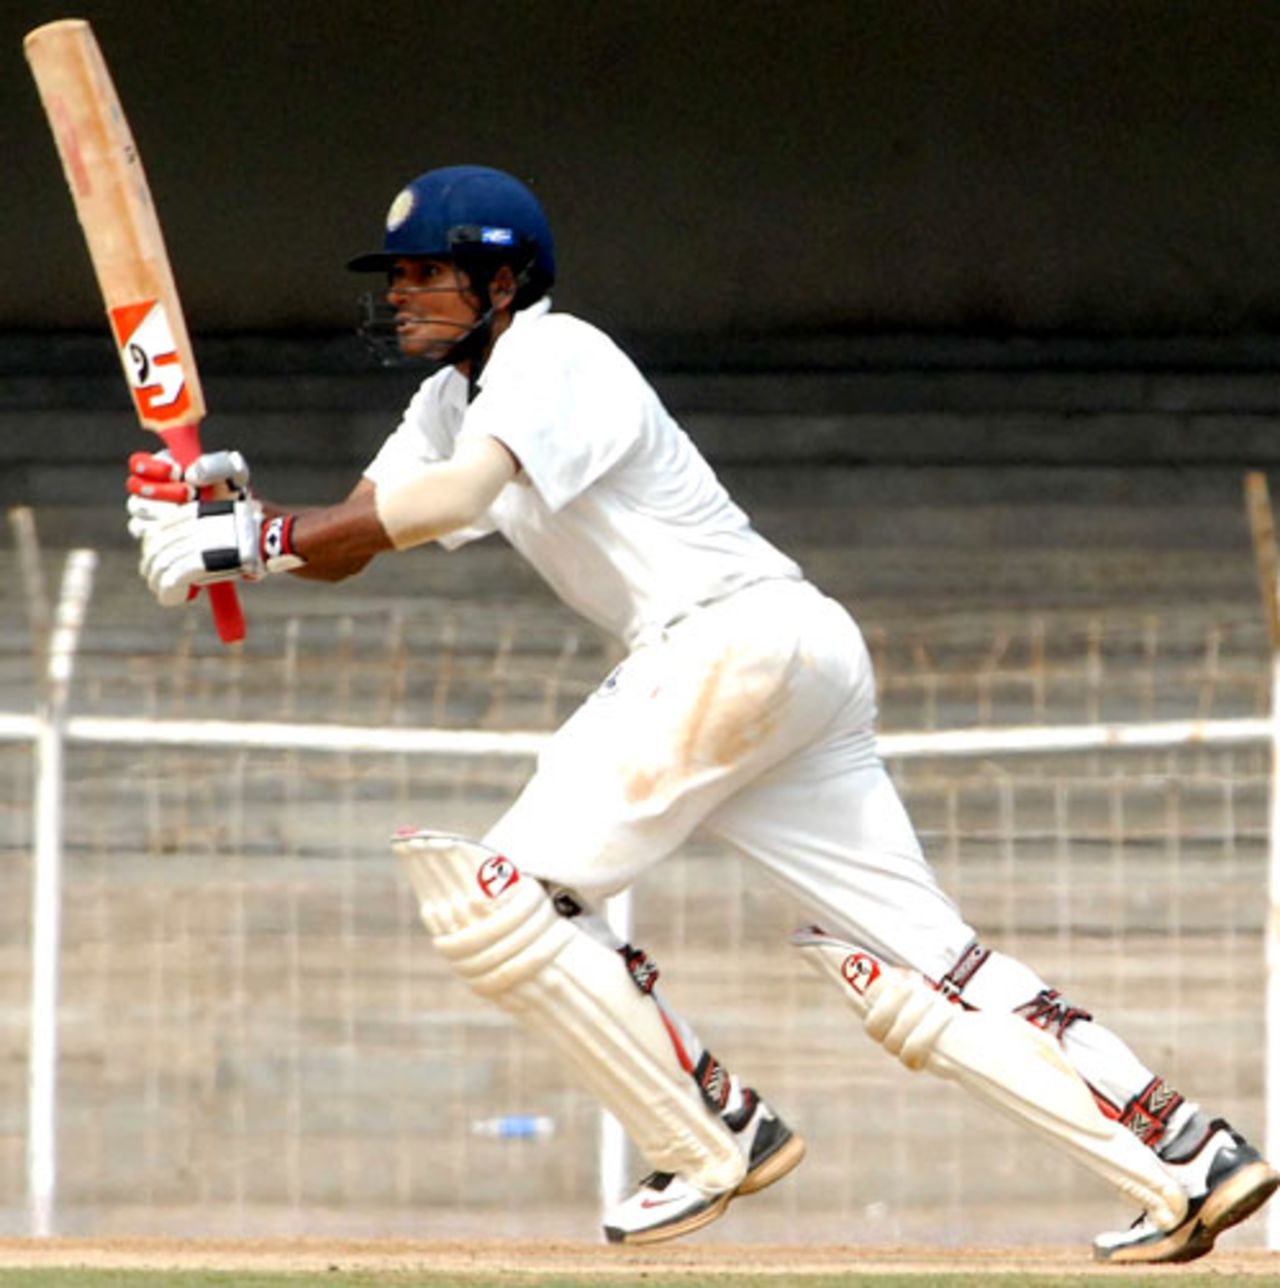 S Badrinath scored 138 off 181 balls to put Tamil Nadu in command, Tamil Nadu v Rajasthan, Ranji Trophy Super League, Group A, 6th round, Chennai, 1st day, December 17, 2007 